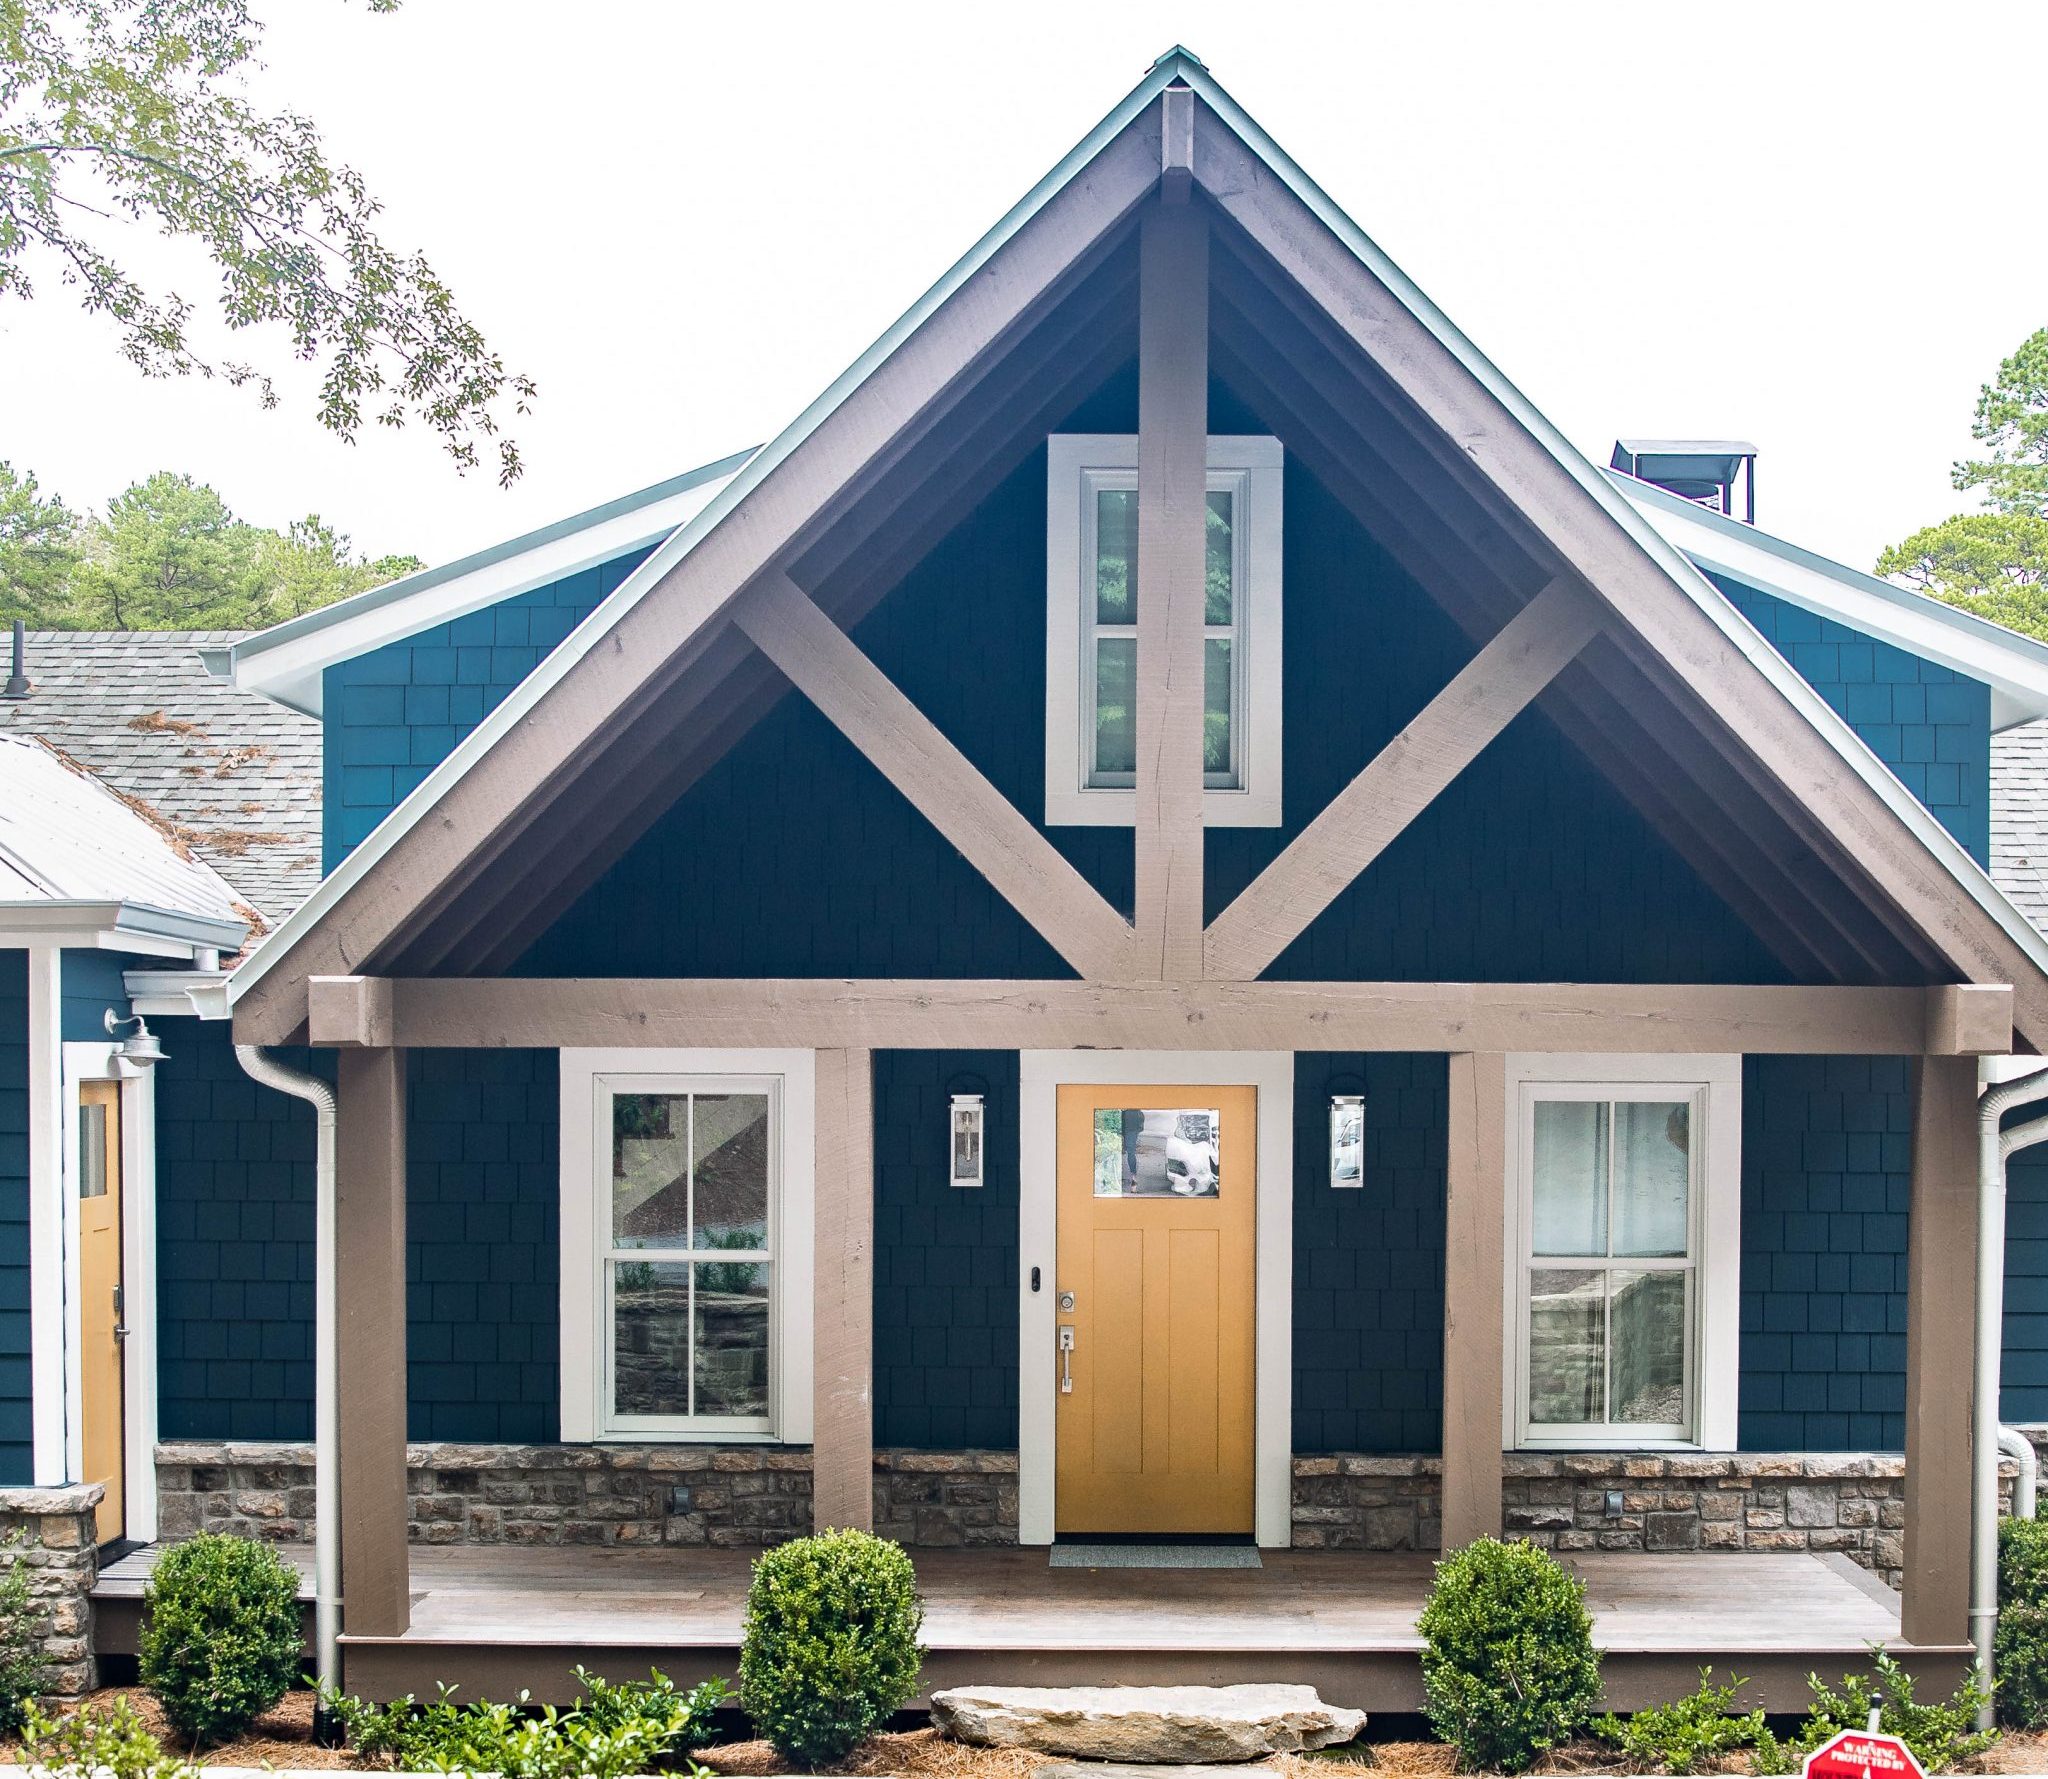 lakehouse exterior blue and white and yellow with raw wood exposed beams